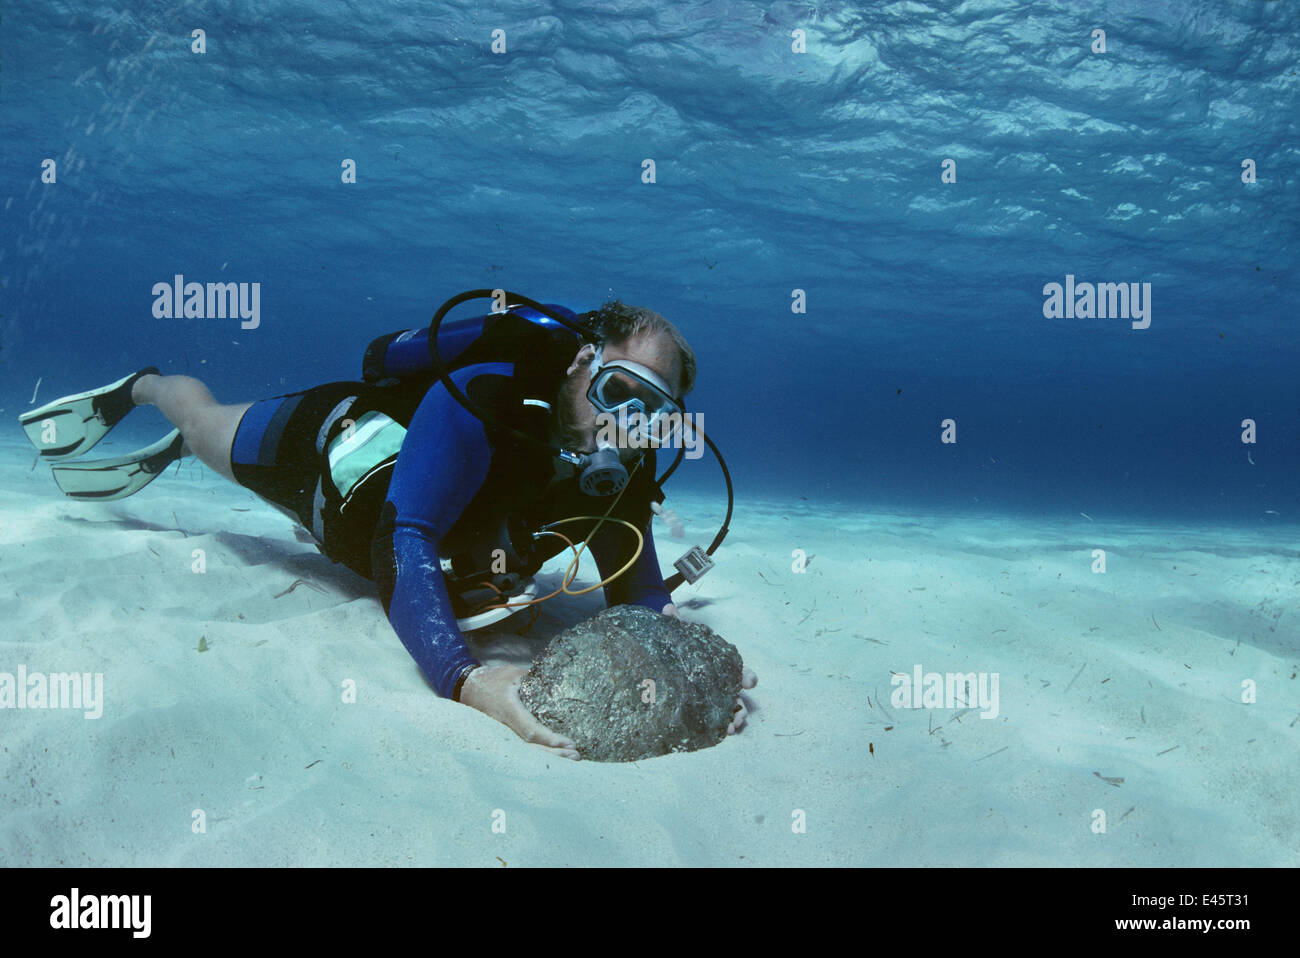 Diver finds a 24kt gold piece weighing 26 pounds during the recovery of the shipwreck 'Las Maravillas', a Spanish galleon sunk in 1658, Bahamas. 1987 Stock Photo